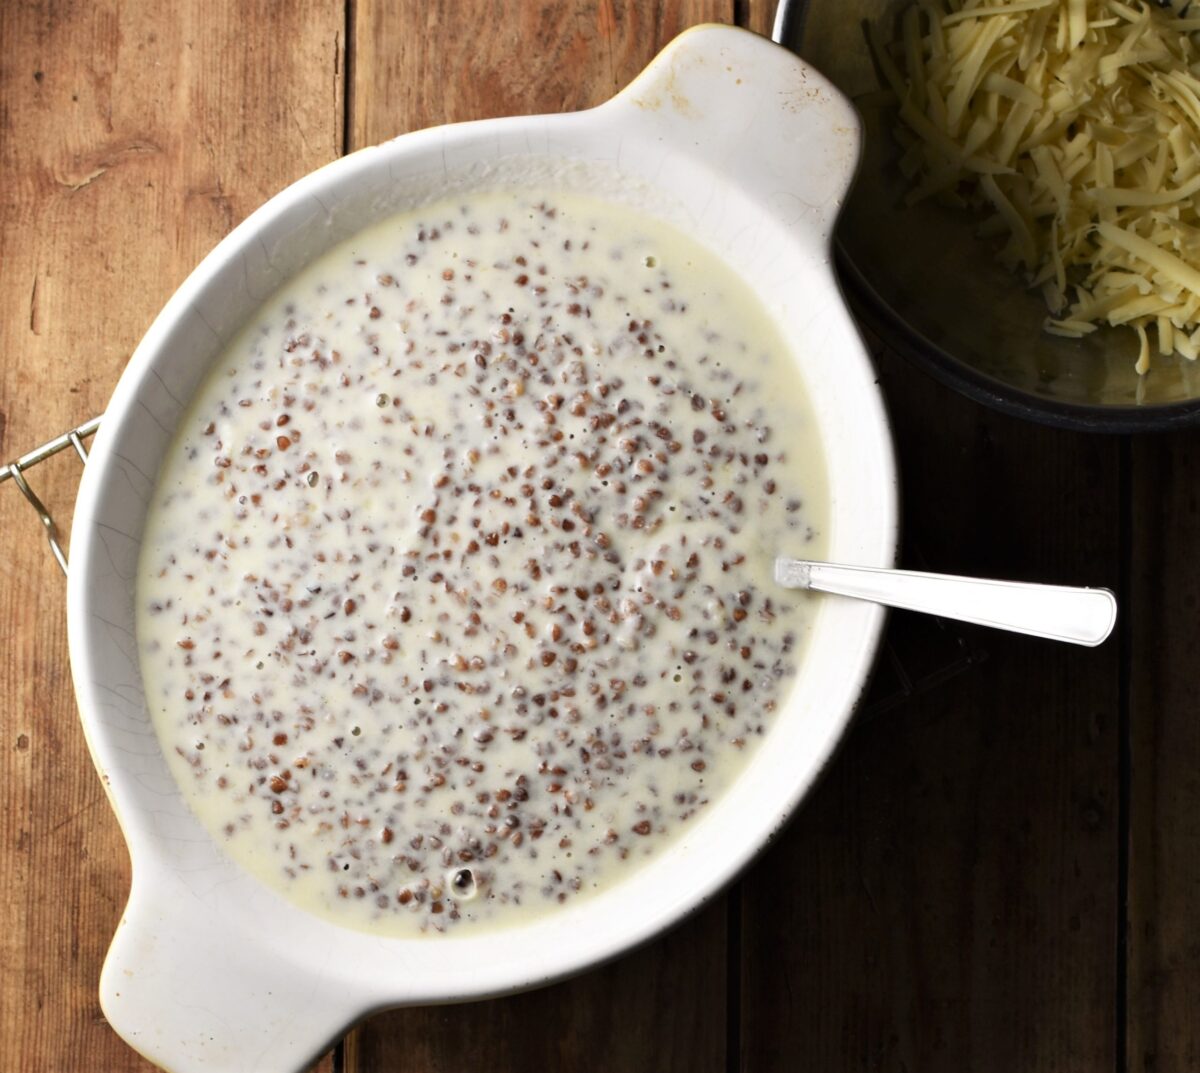 Buckwheat groats in white sauce in oval white dish with spoon.